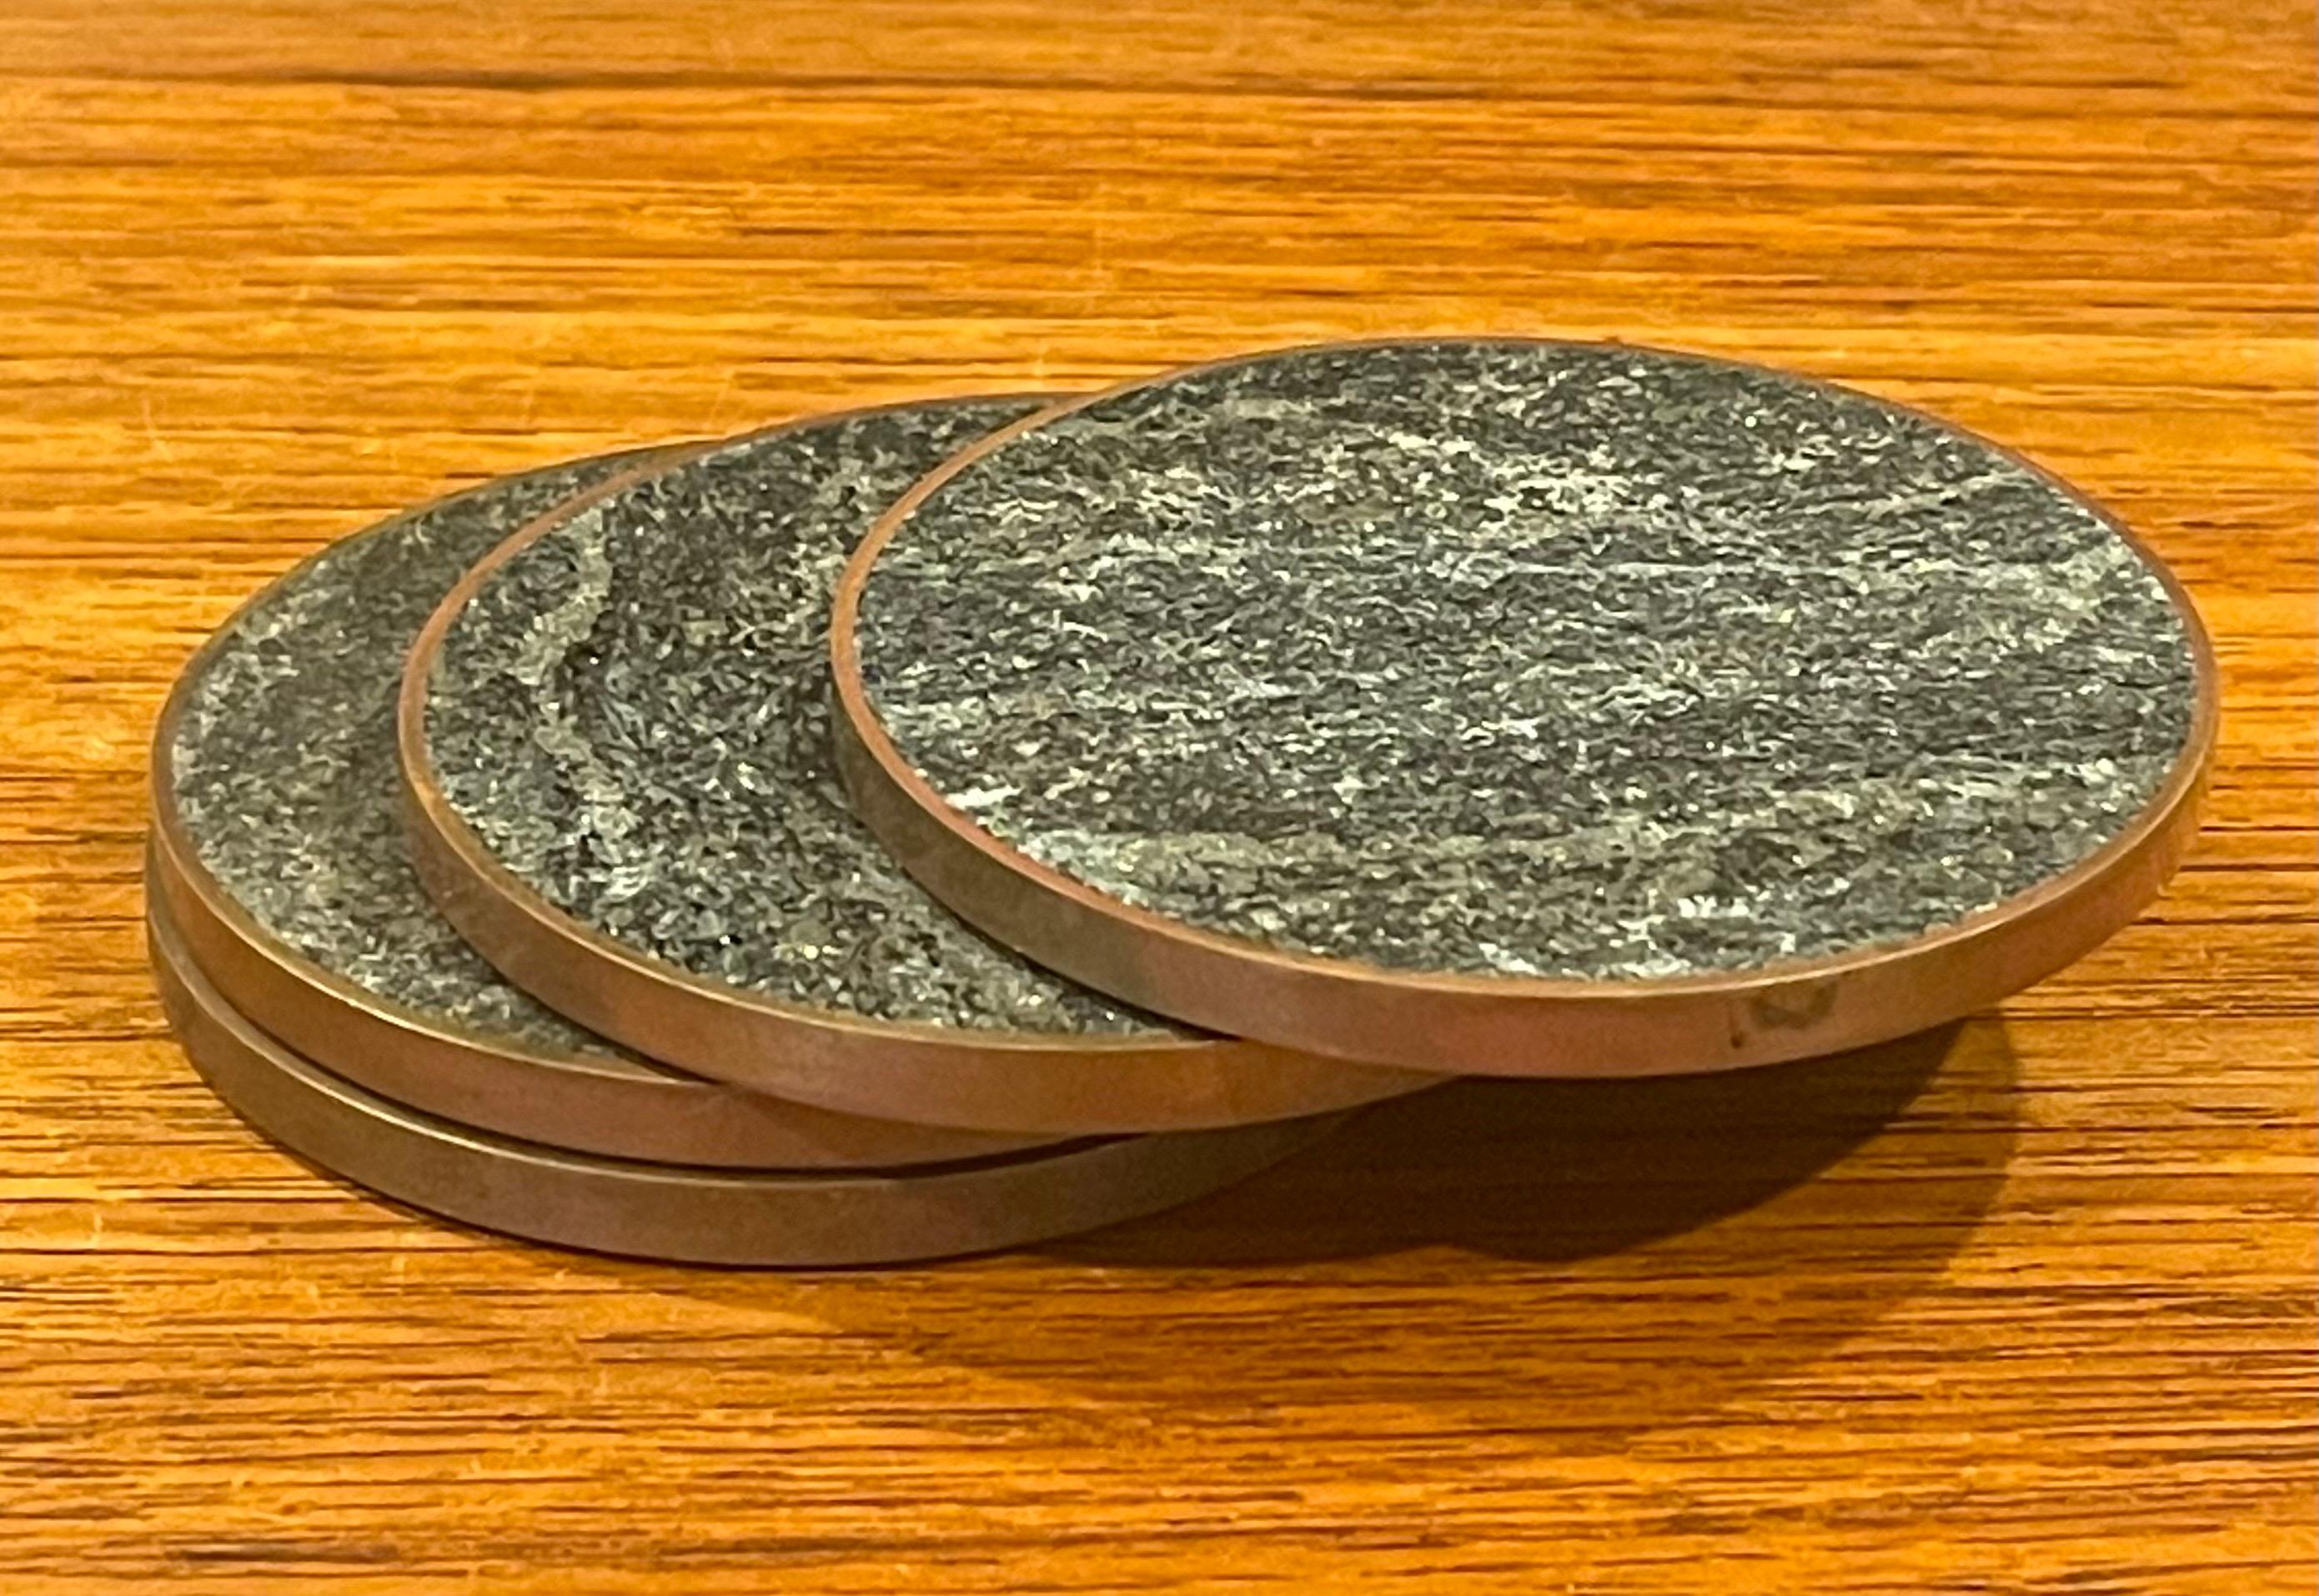 Nice set of four Scandivanian modern polished stone and brass round drink coasters by Saulo, circa 1970s. The coasters are in very good vintage condition and measure 3.25